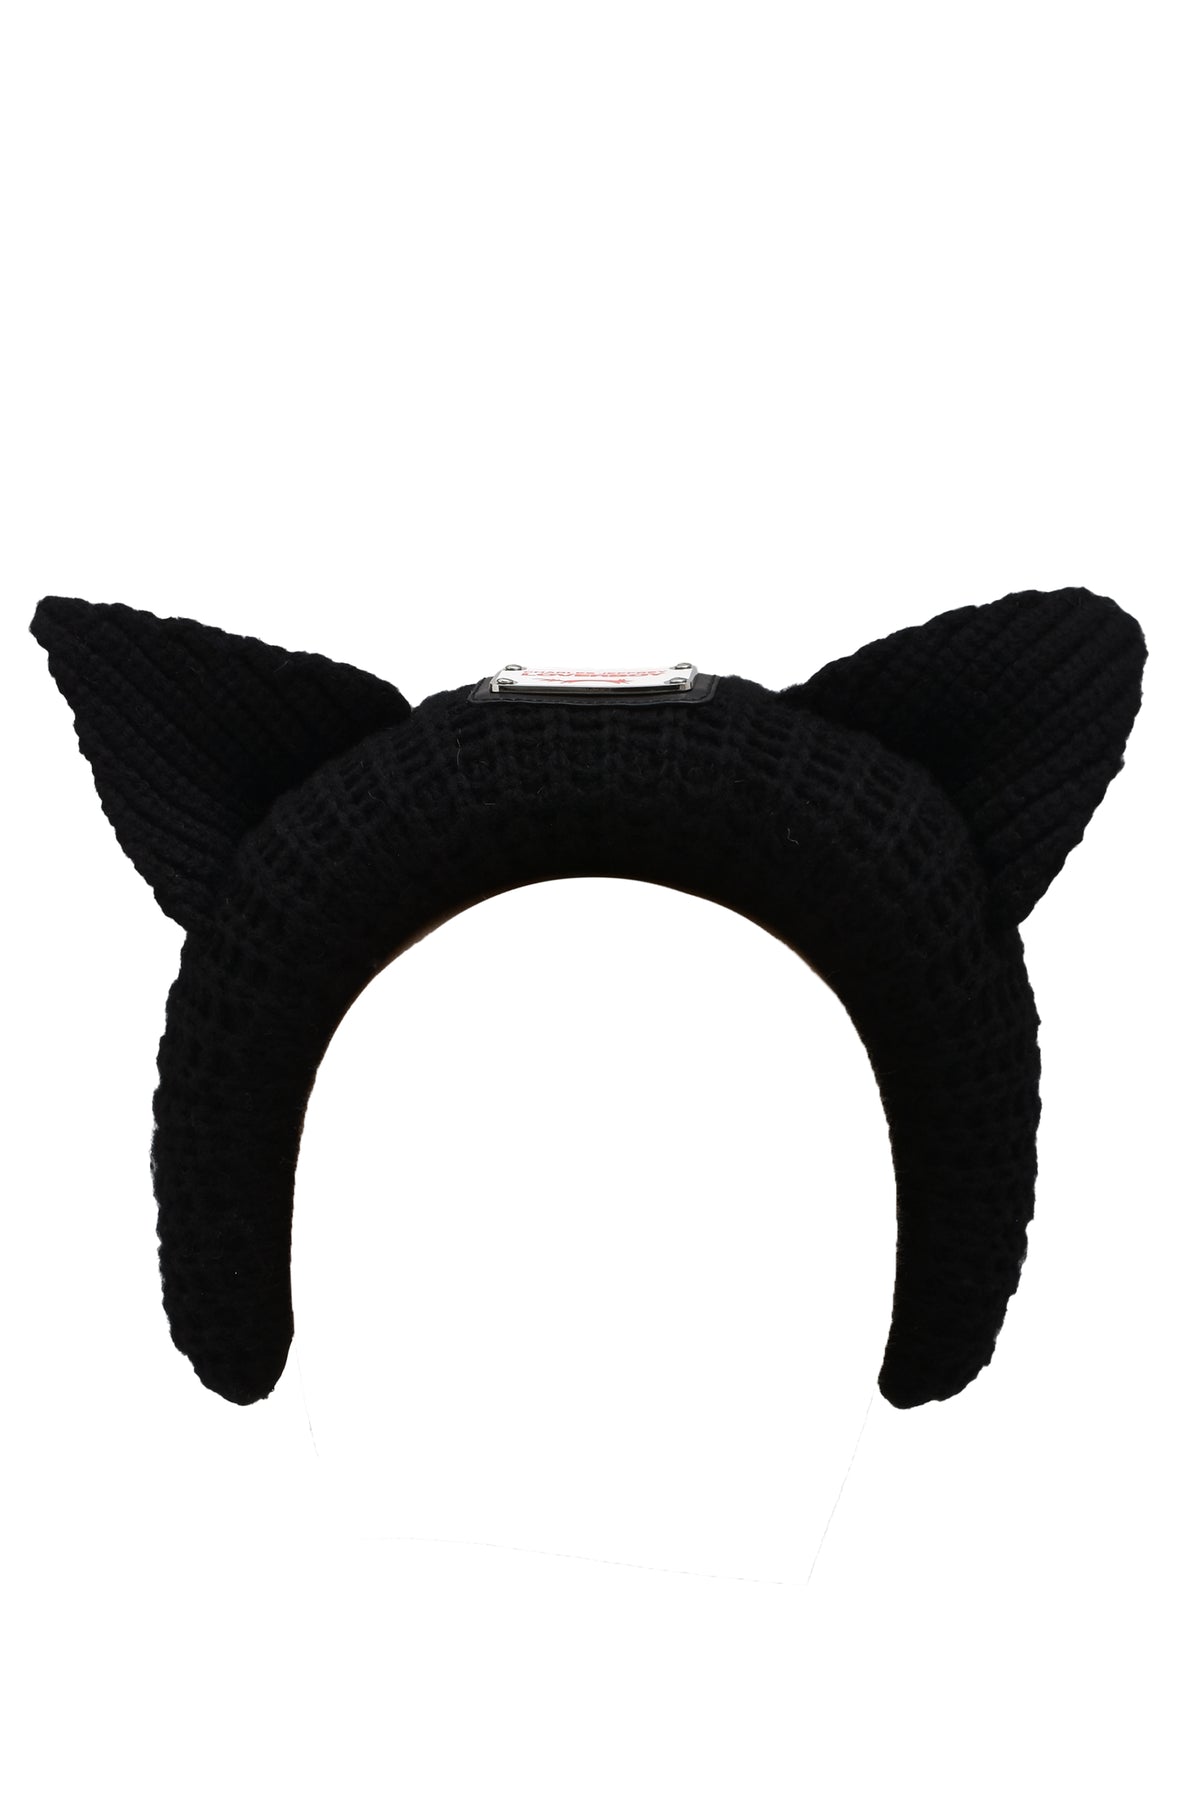 EARS ALICE BAND / BLK